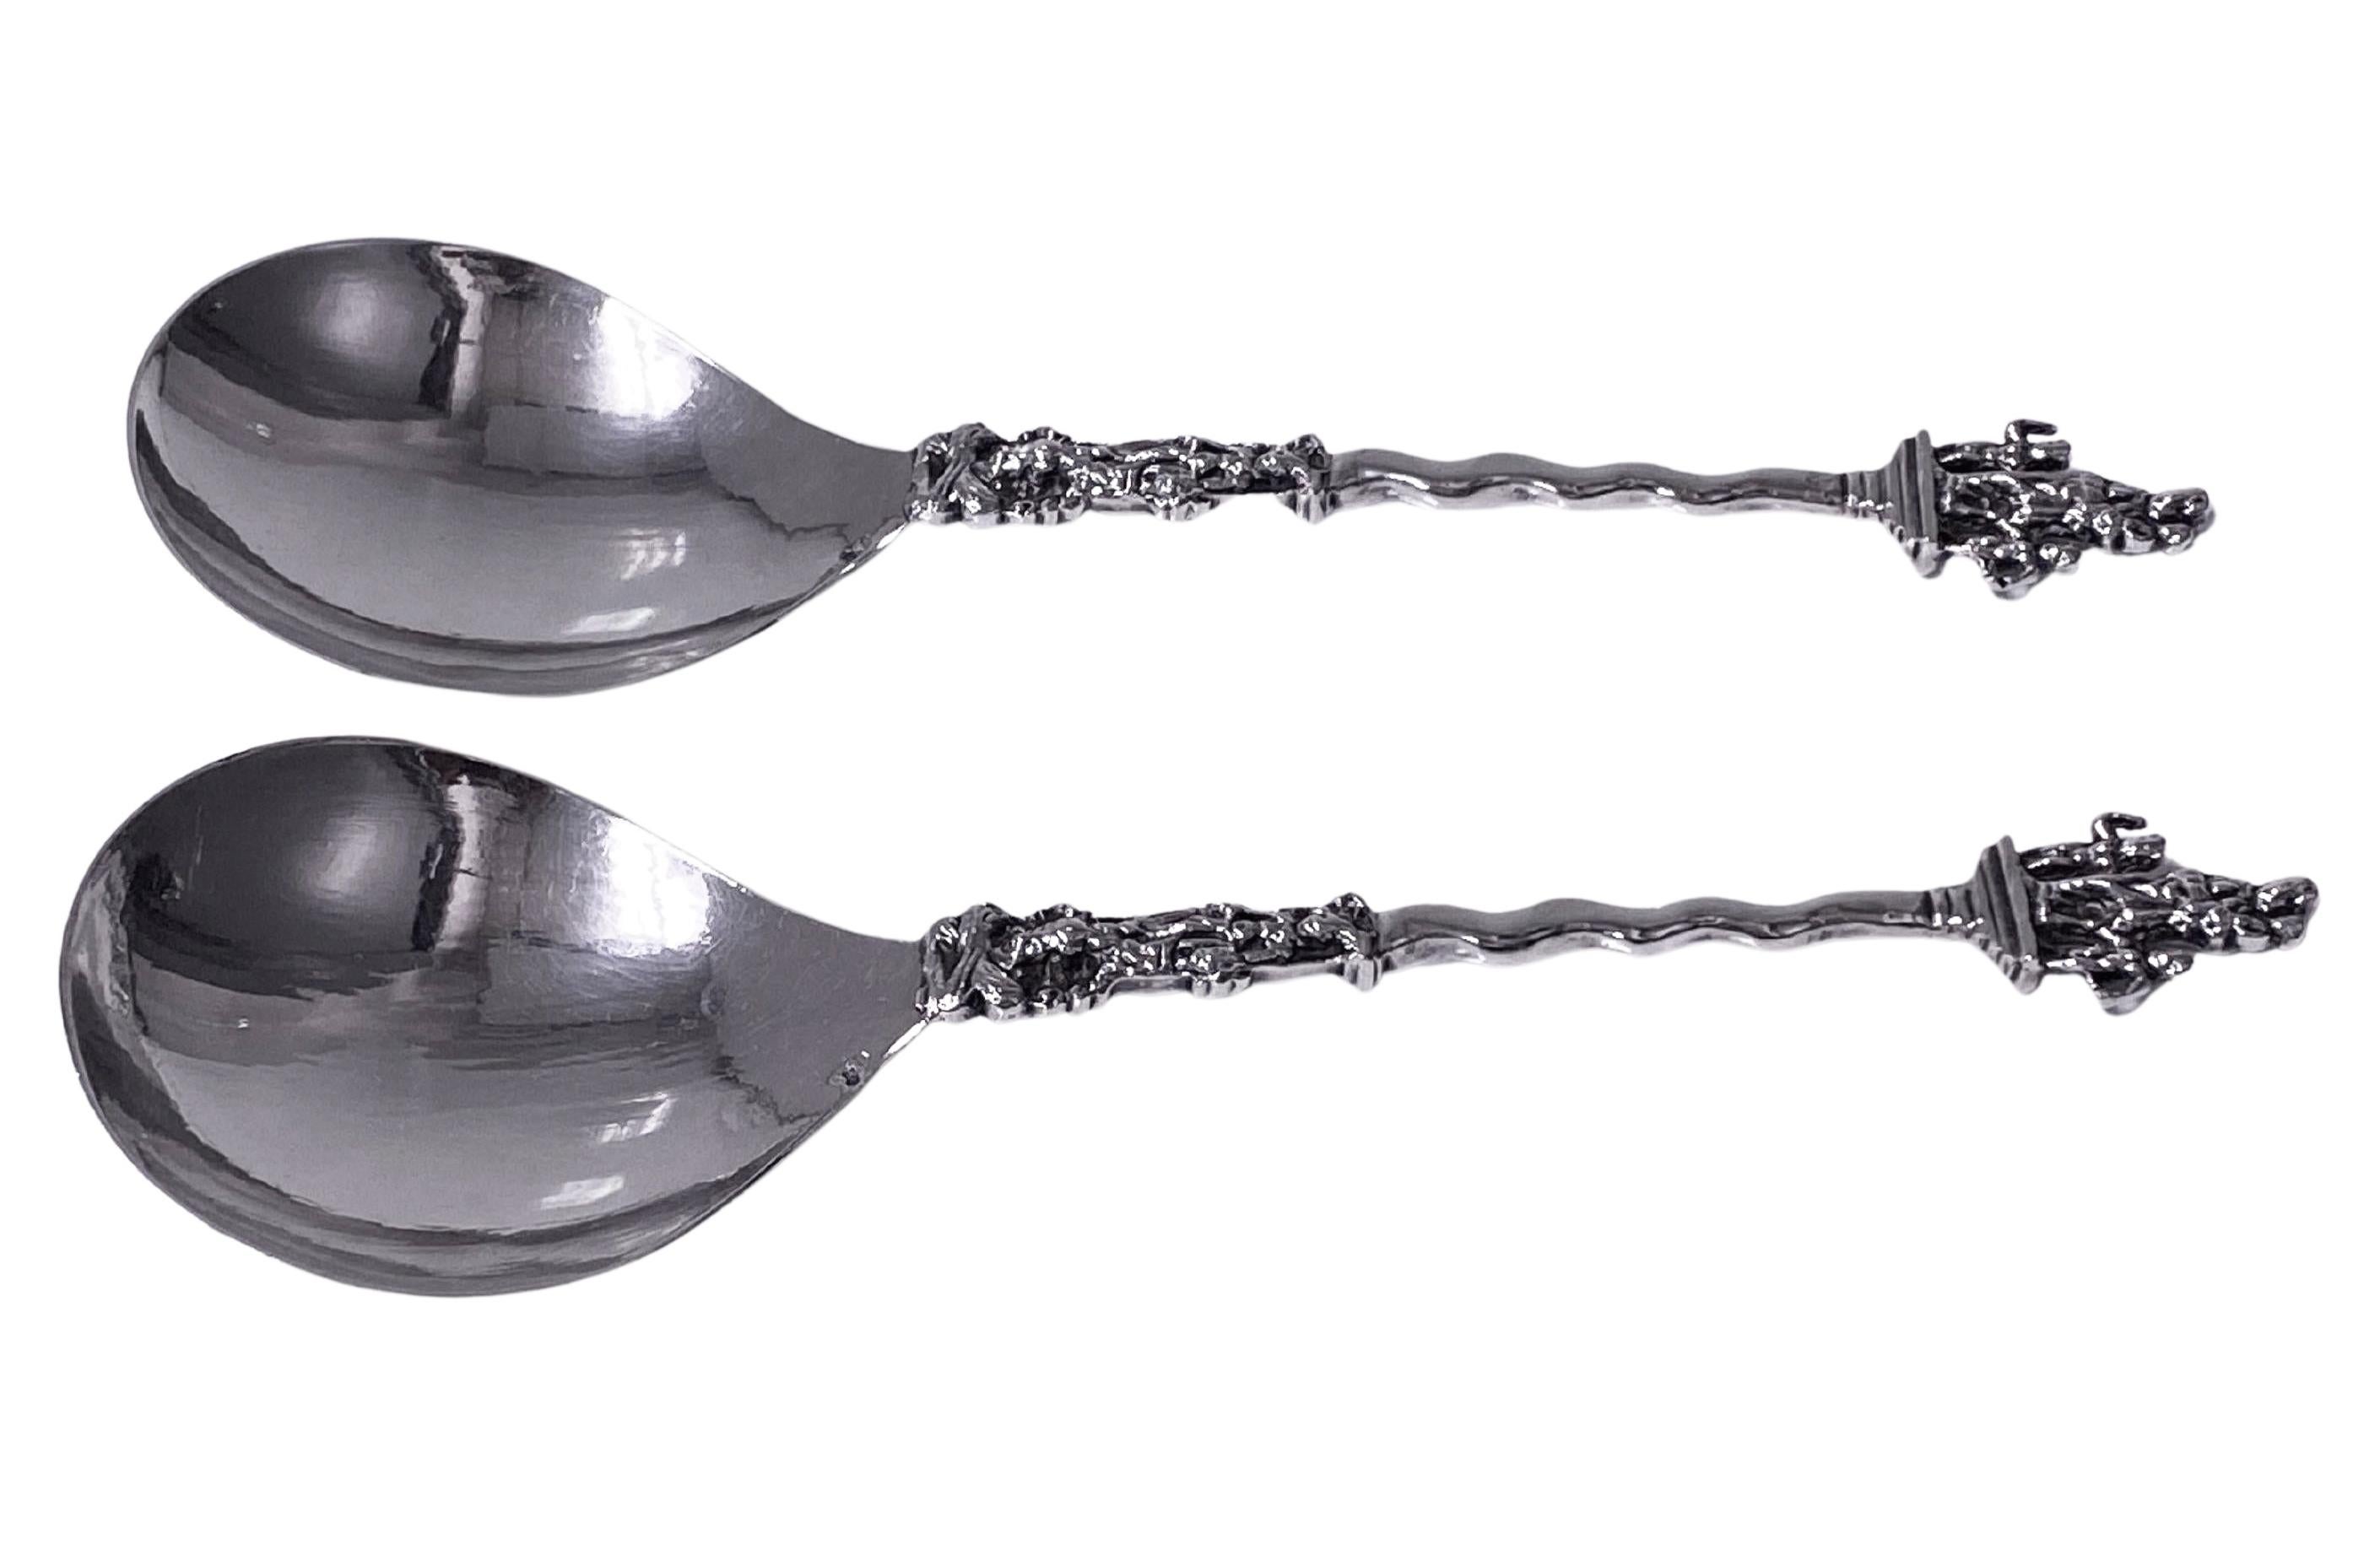 Pair of Antique Dutch Silver figural Spoons, C.1890. Each depicting at the top a figural scene of woman holding a baby with a standing child on either side, twist stems and further figural scenes to lower part of stem. The reverse bowls of each